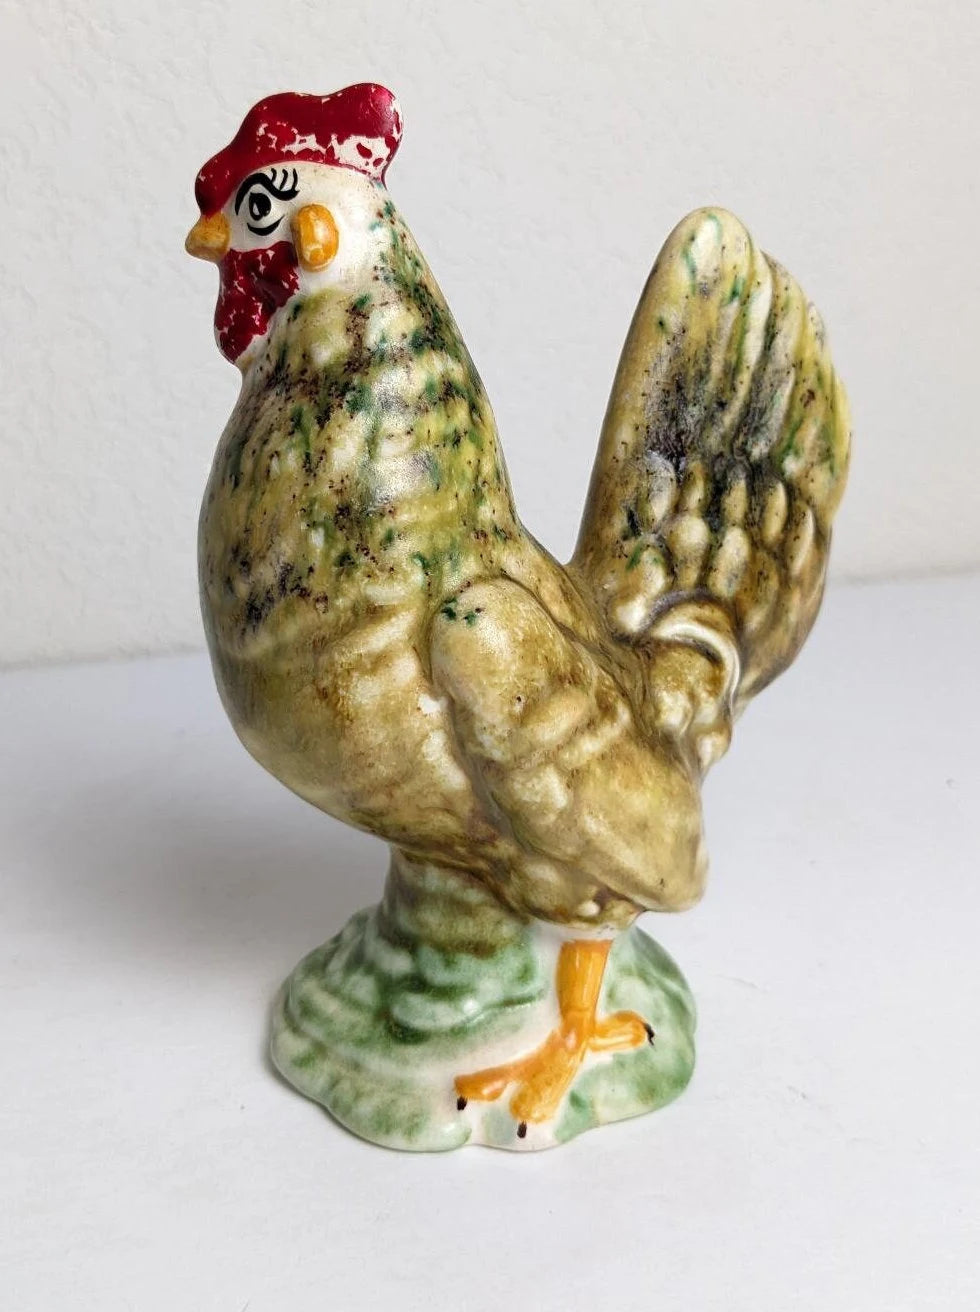 Vintage Rooster and Chicken Figurines